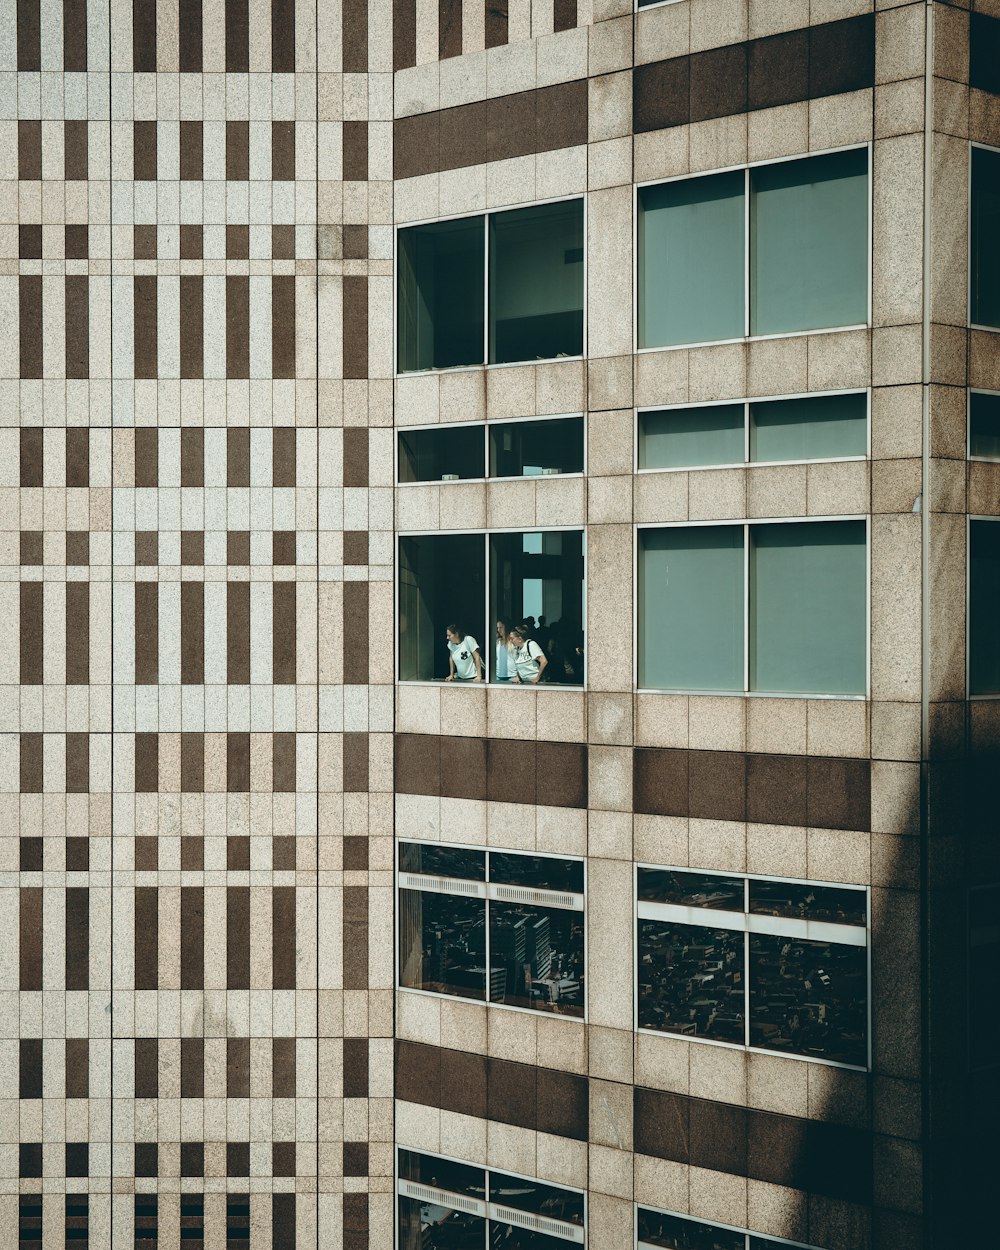 three persons at building window